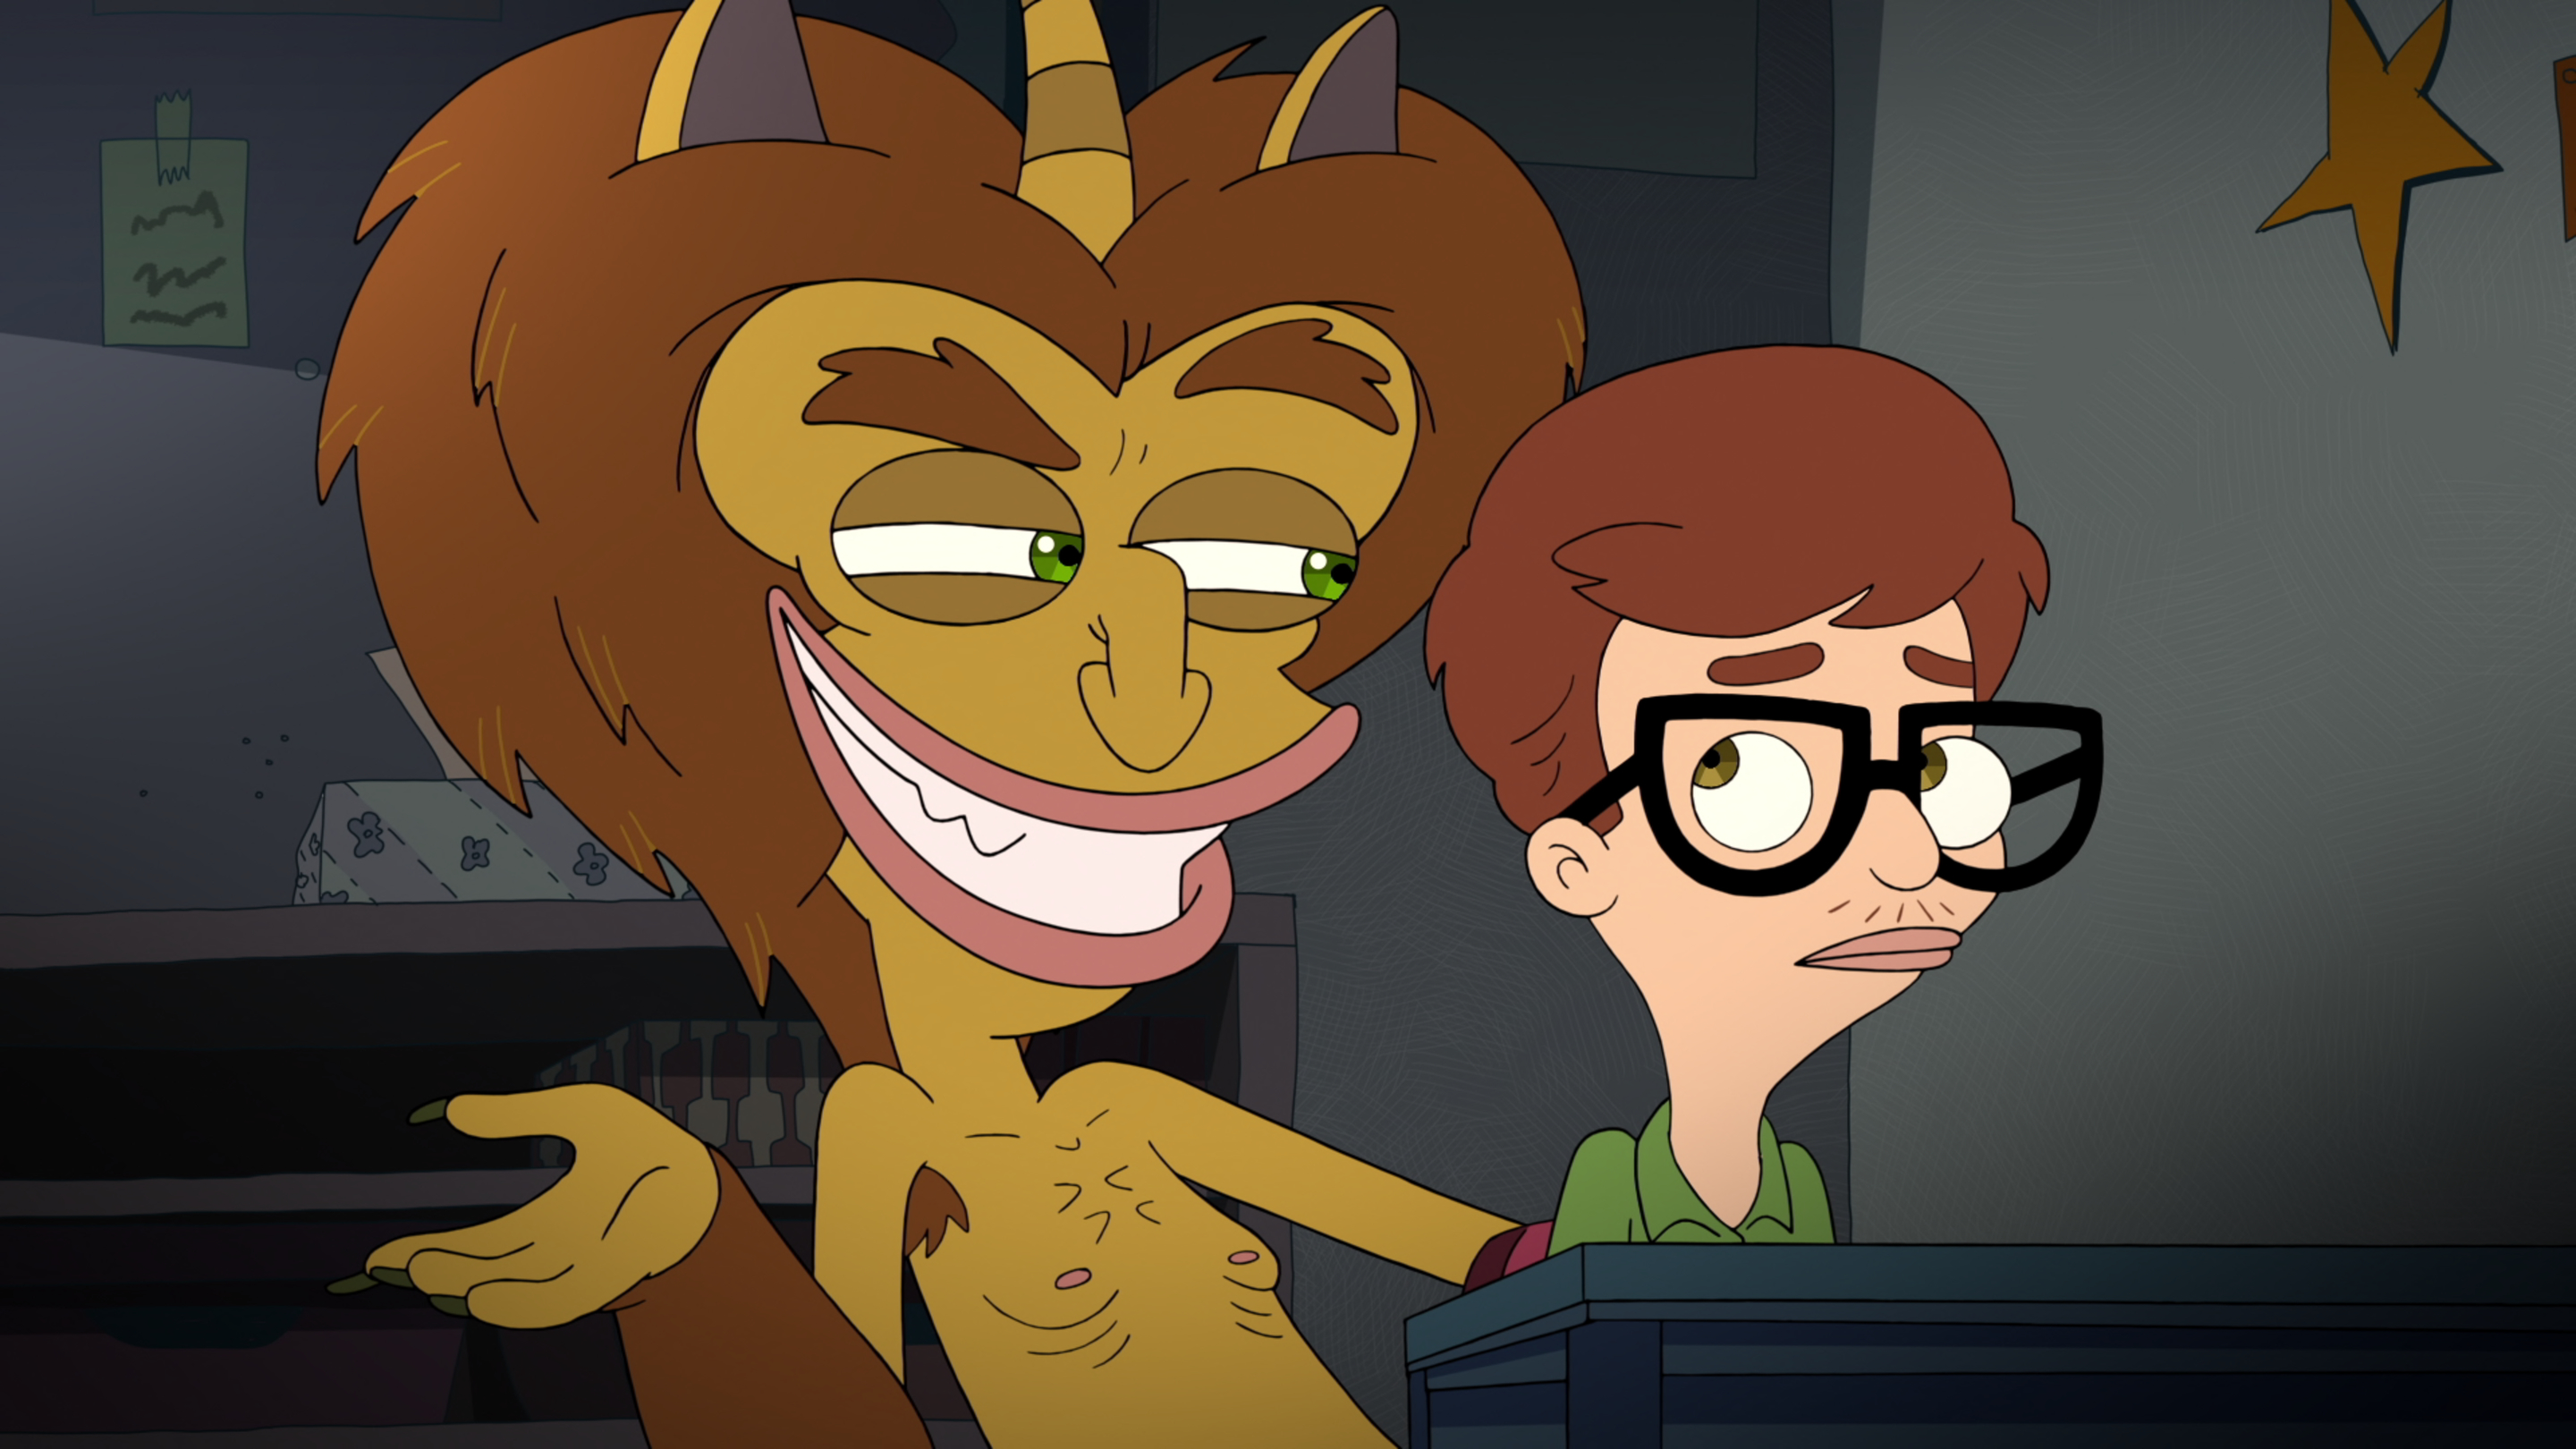 Netflix’s ‘Big Mouth’ Will Teach You About Sex With A Wanking Facebook Game